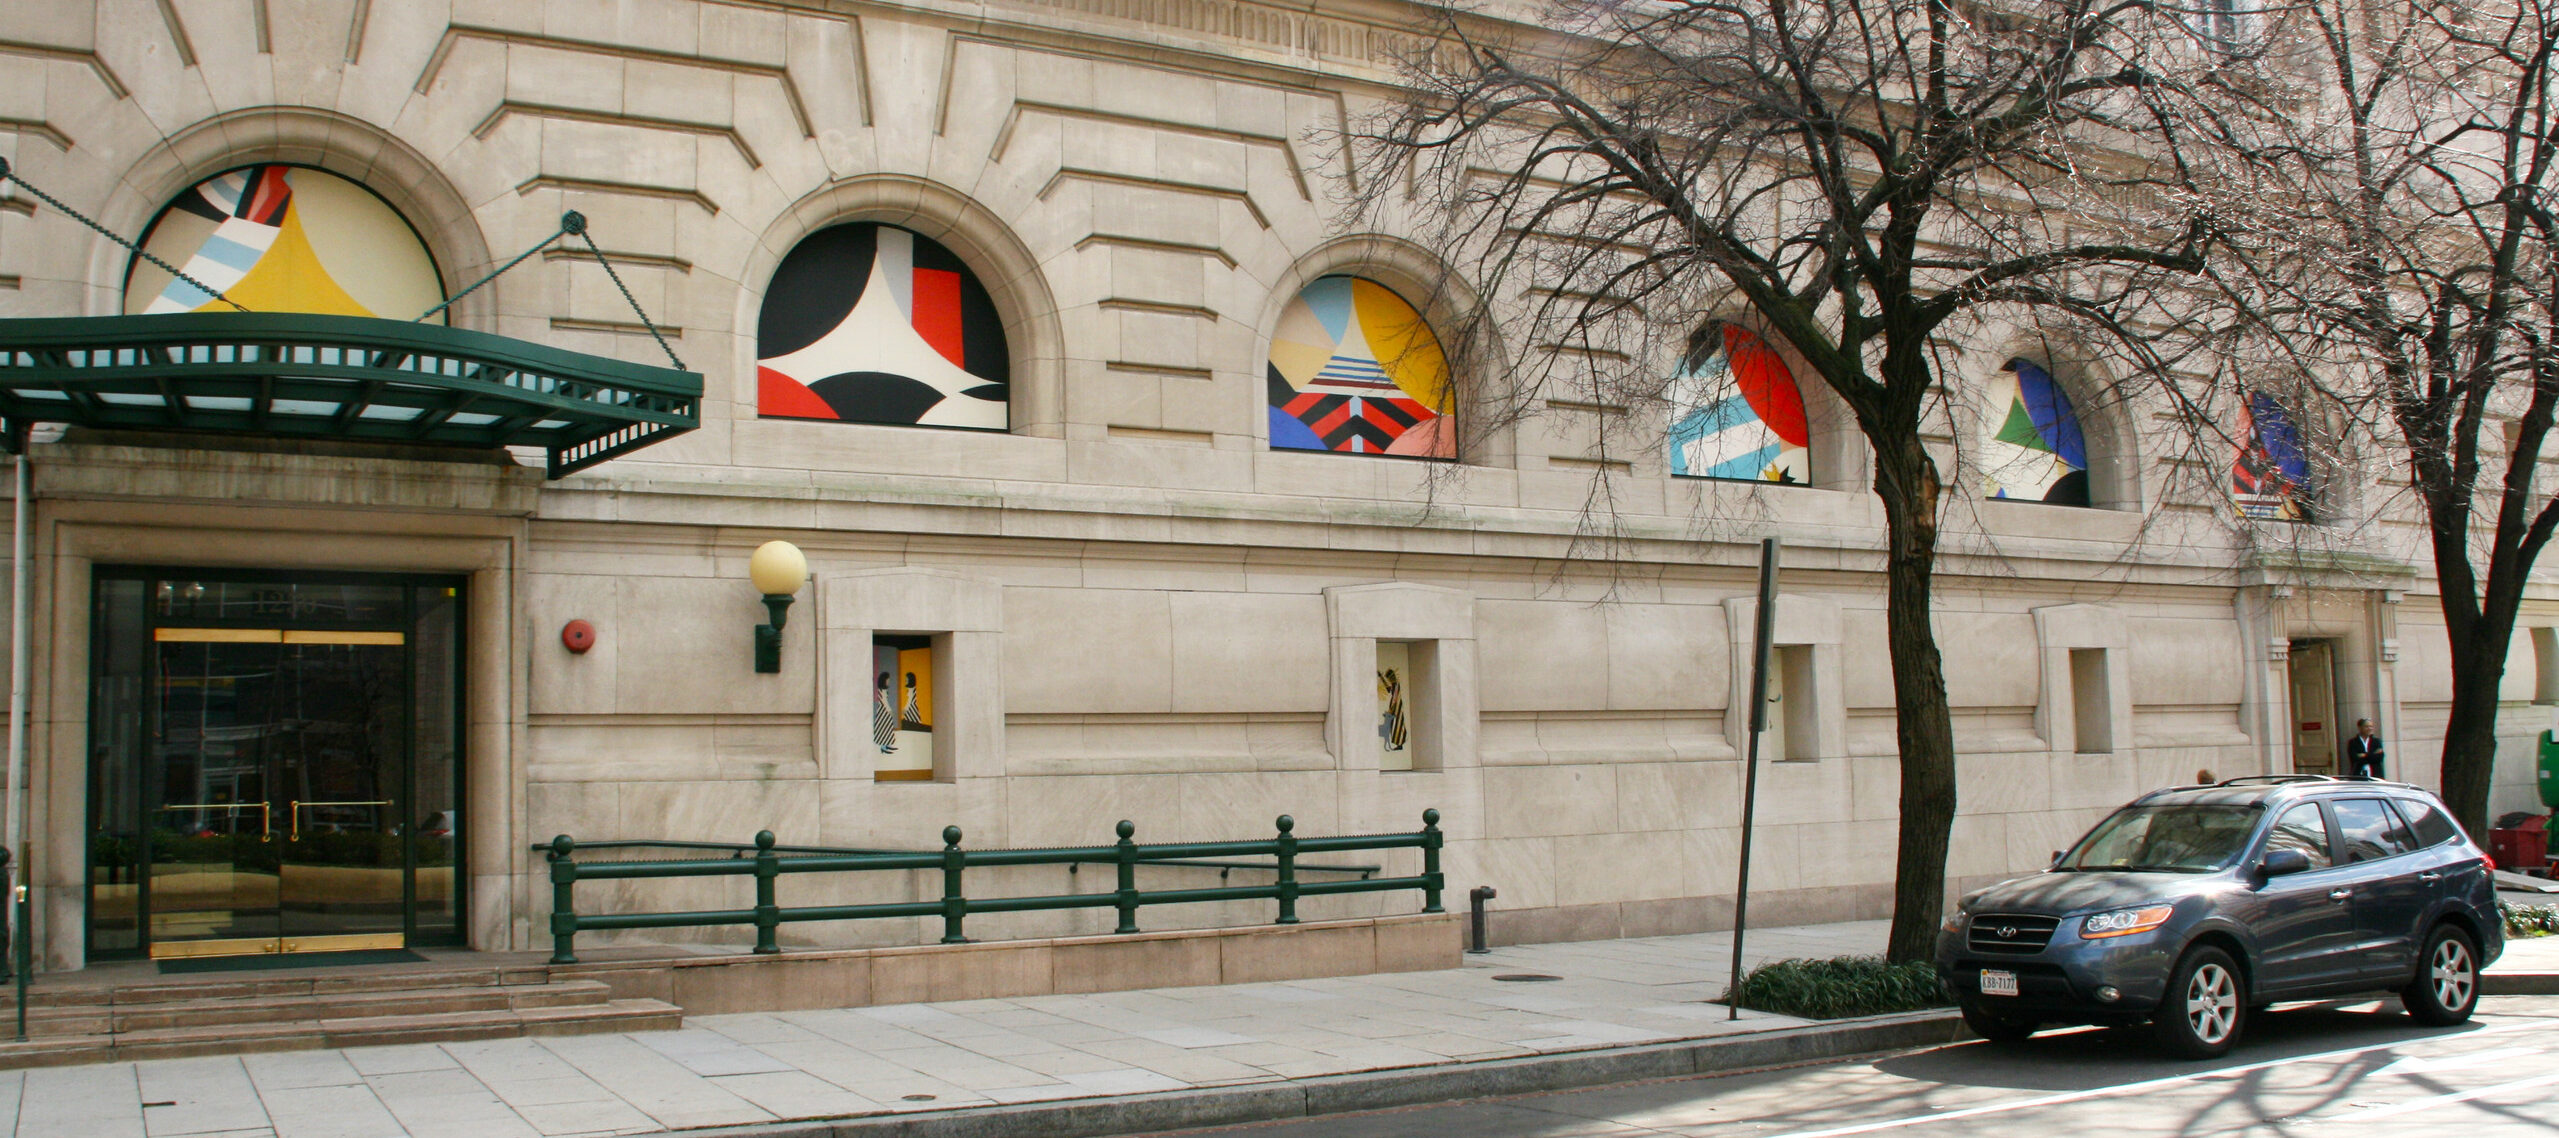 The exterior of the National Museum of Women in the Arts, showcasing colorful, geometric artworks in arched windows set into a classical, tan-colored building.